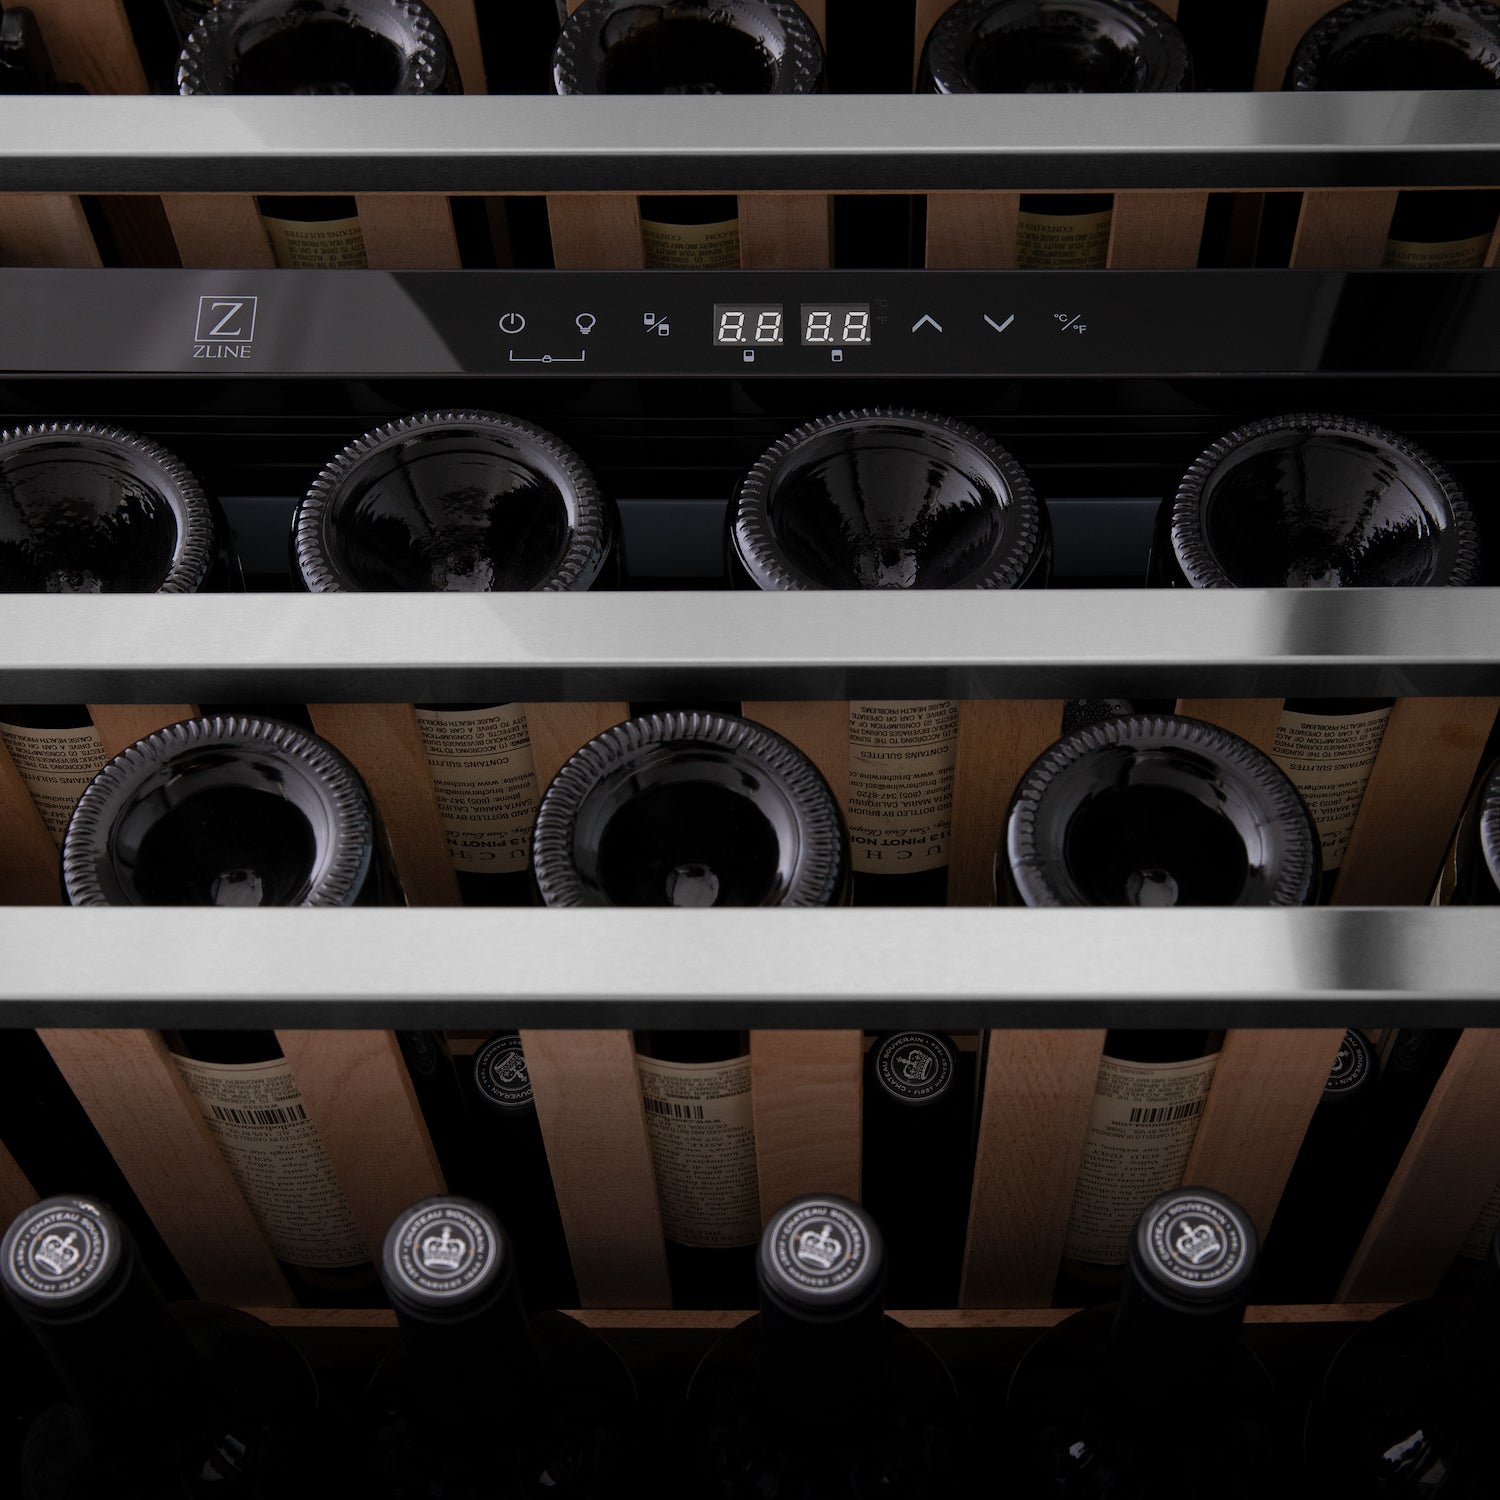 Four levels of adjustable shelving with wine inside Wine Cooler.